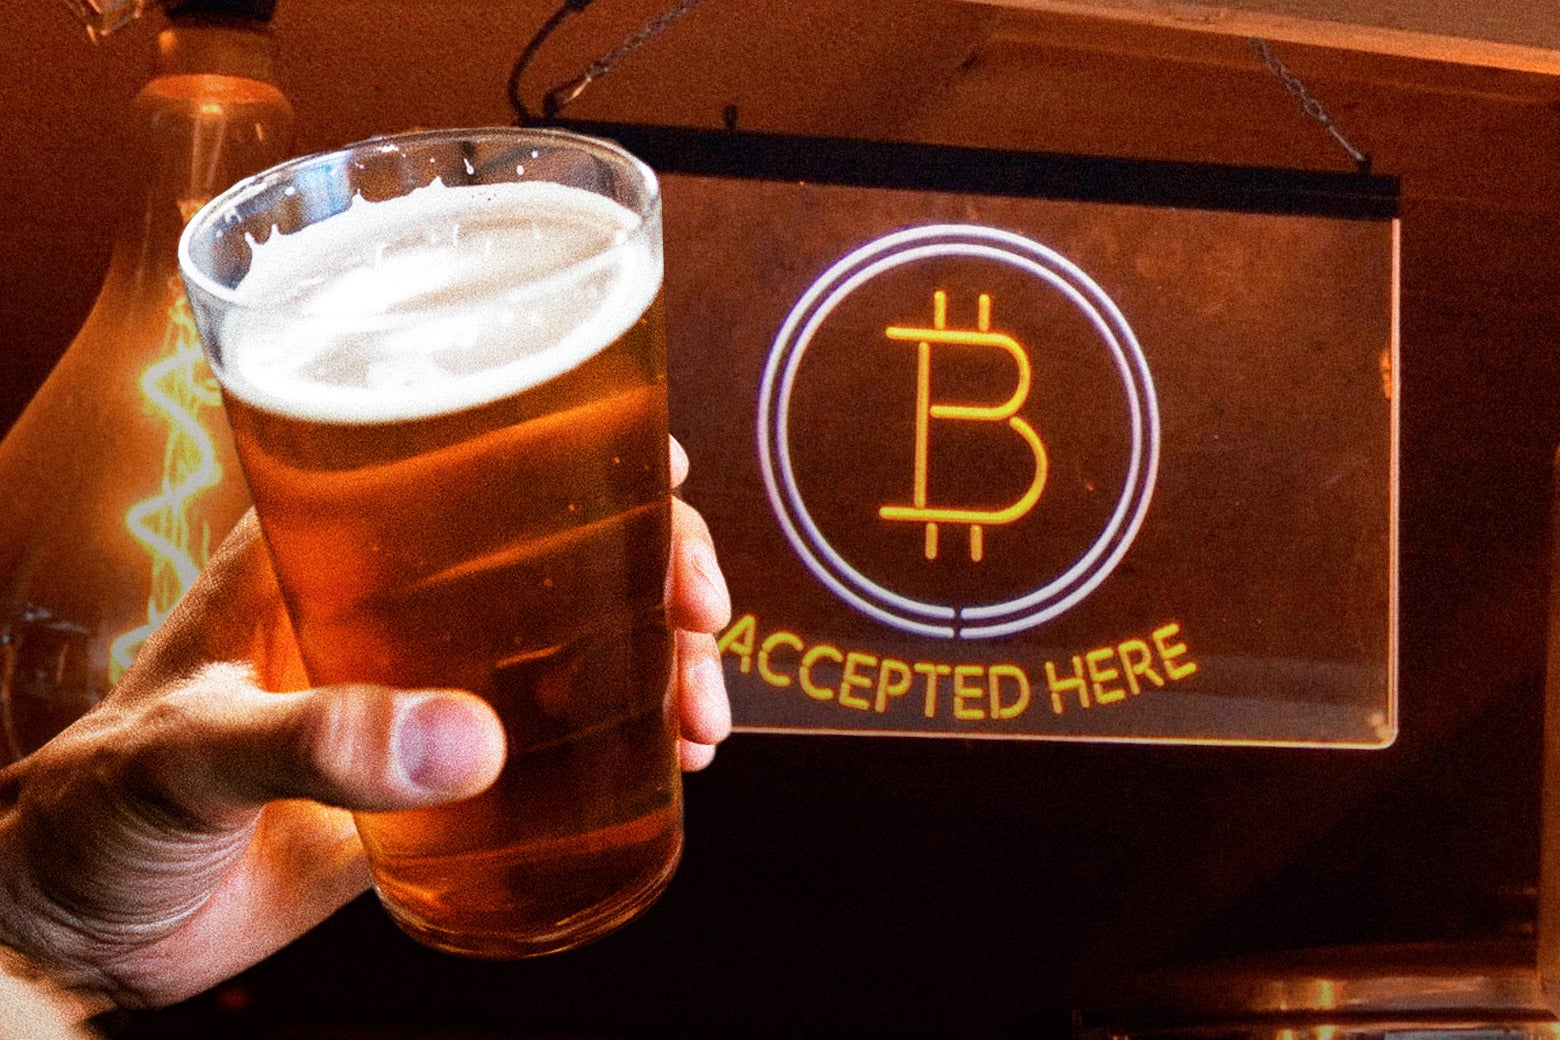 A white hand holds a beer in front of a sign with the Bitcoin logo that says "Bitcoin accepted here."